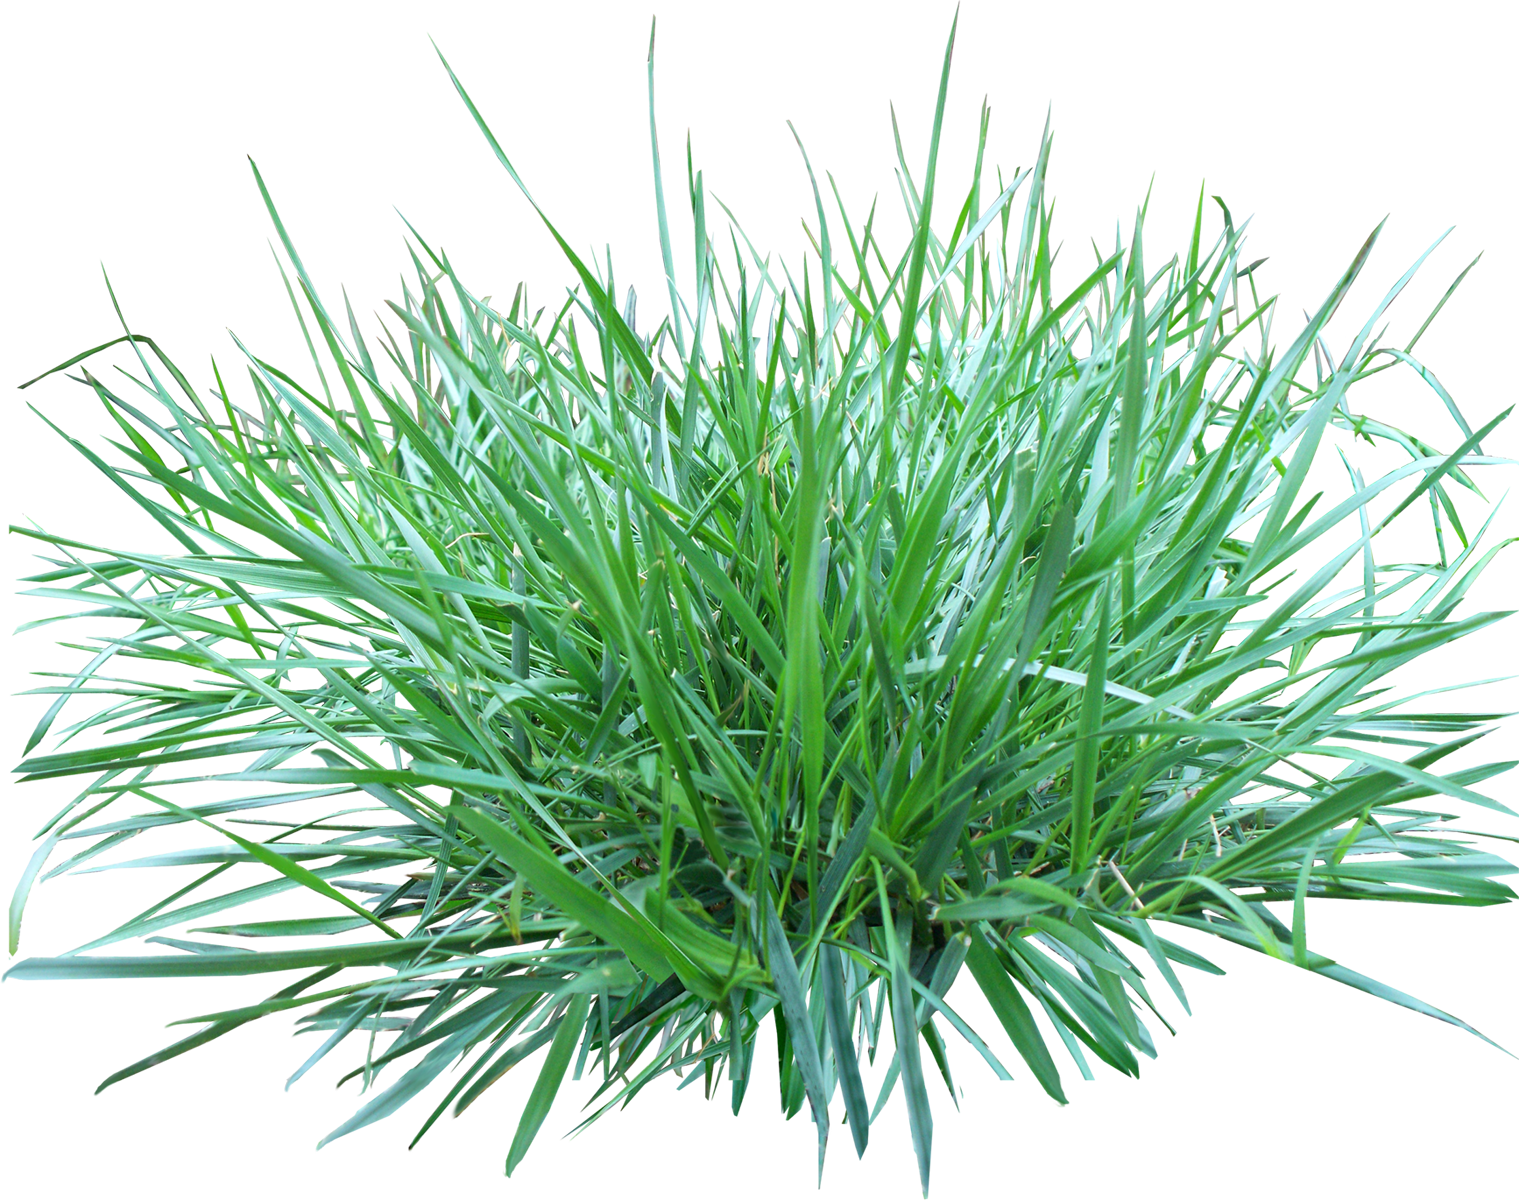 Download Grass Png Image For Free